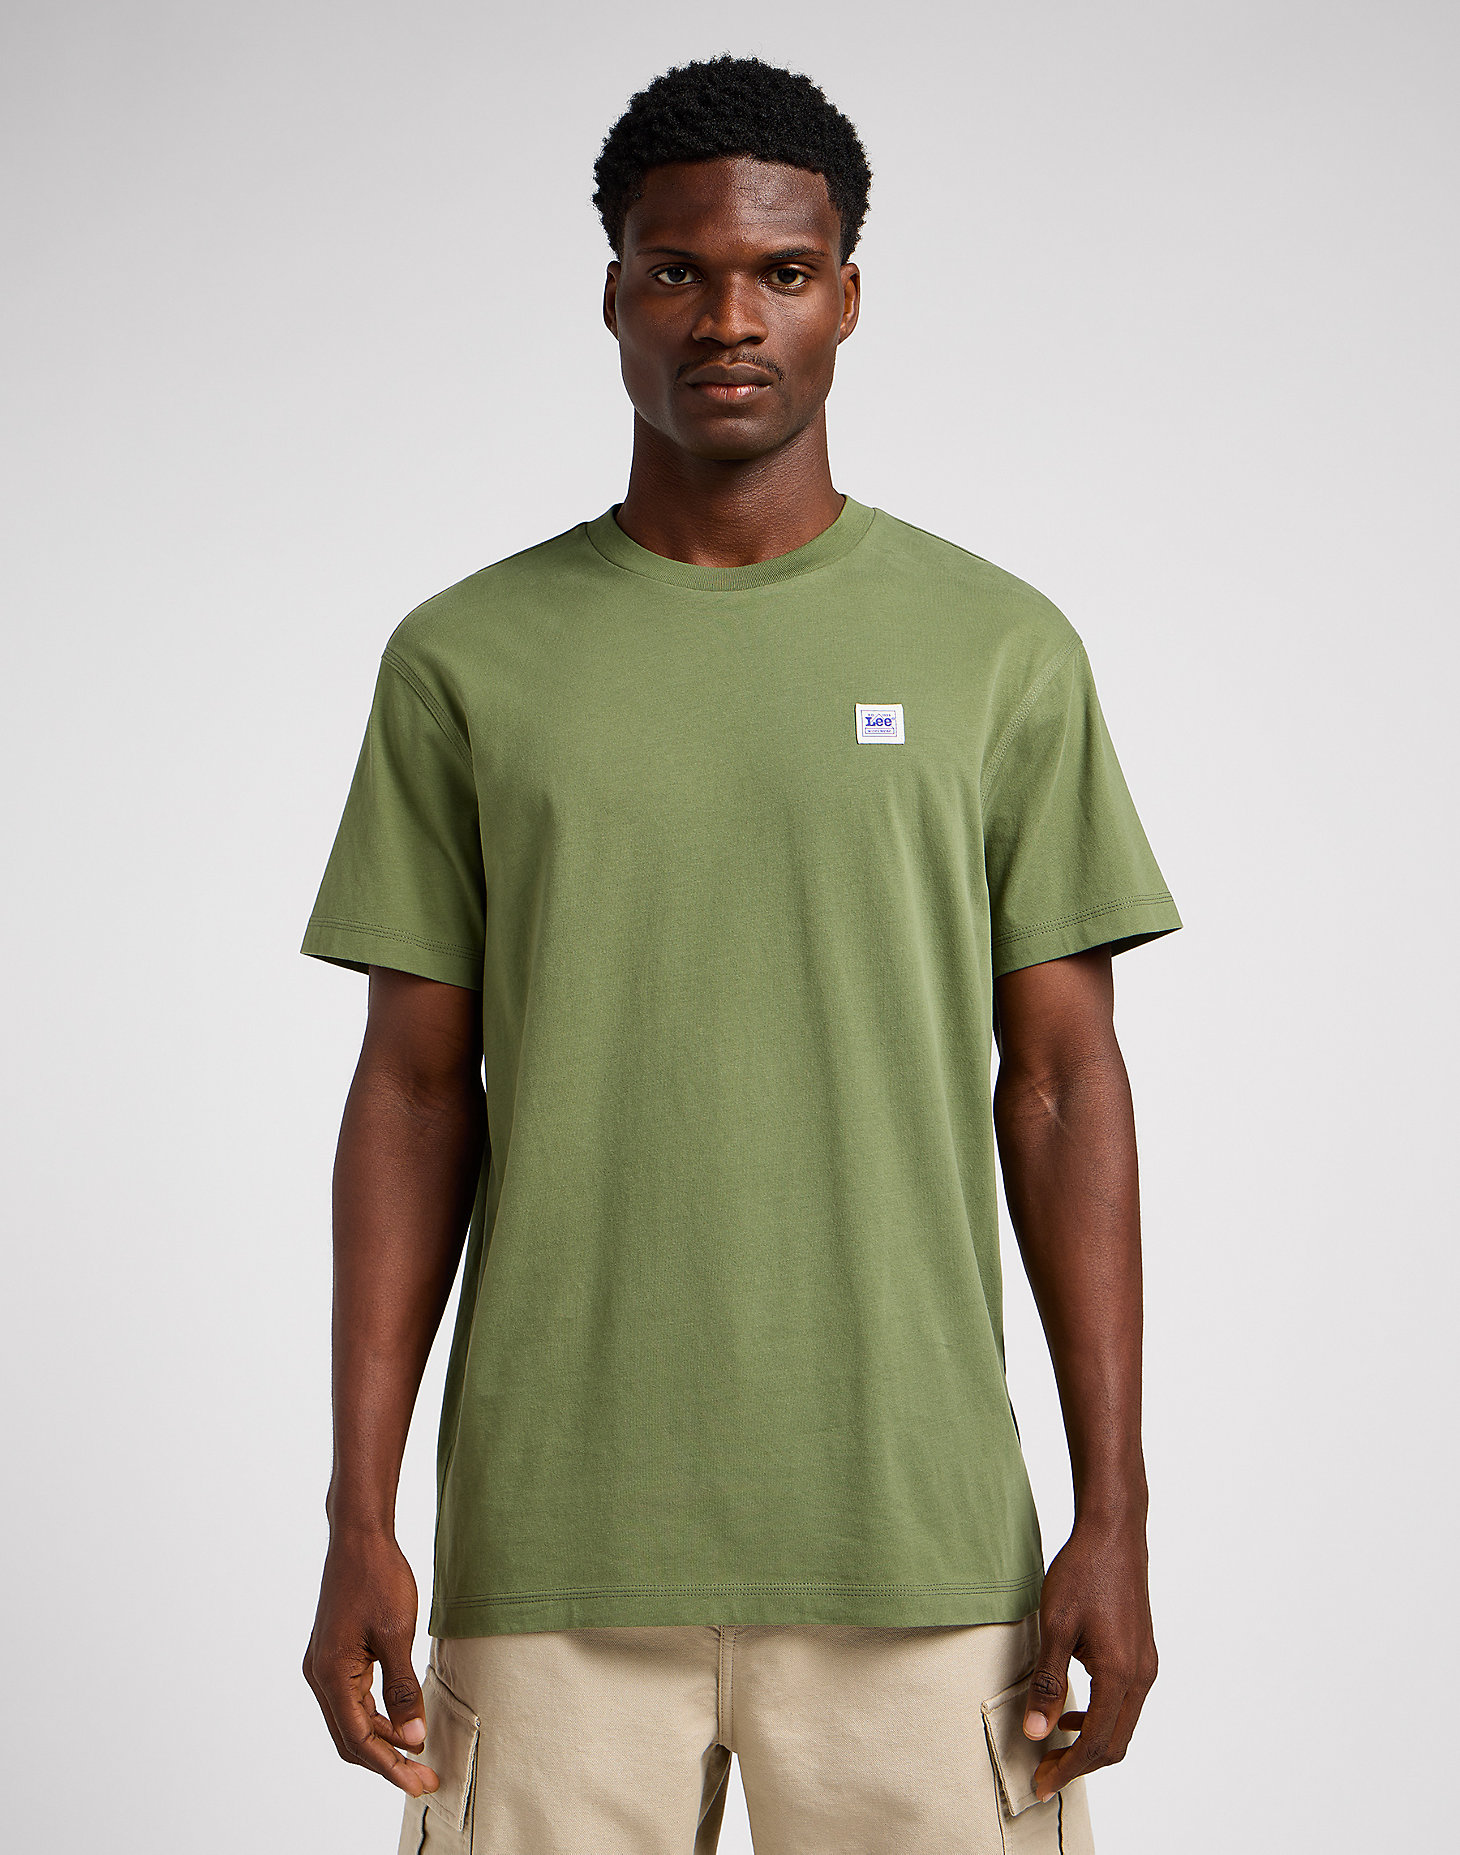 Workwear Tee in Olive Grove main view